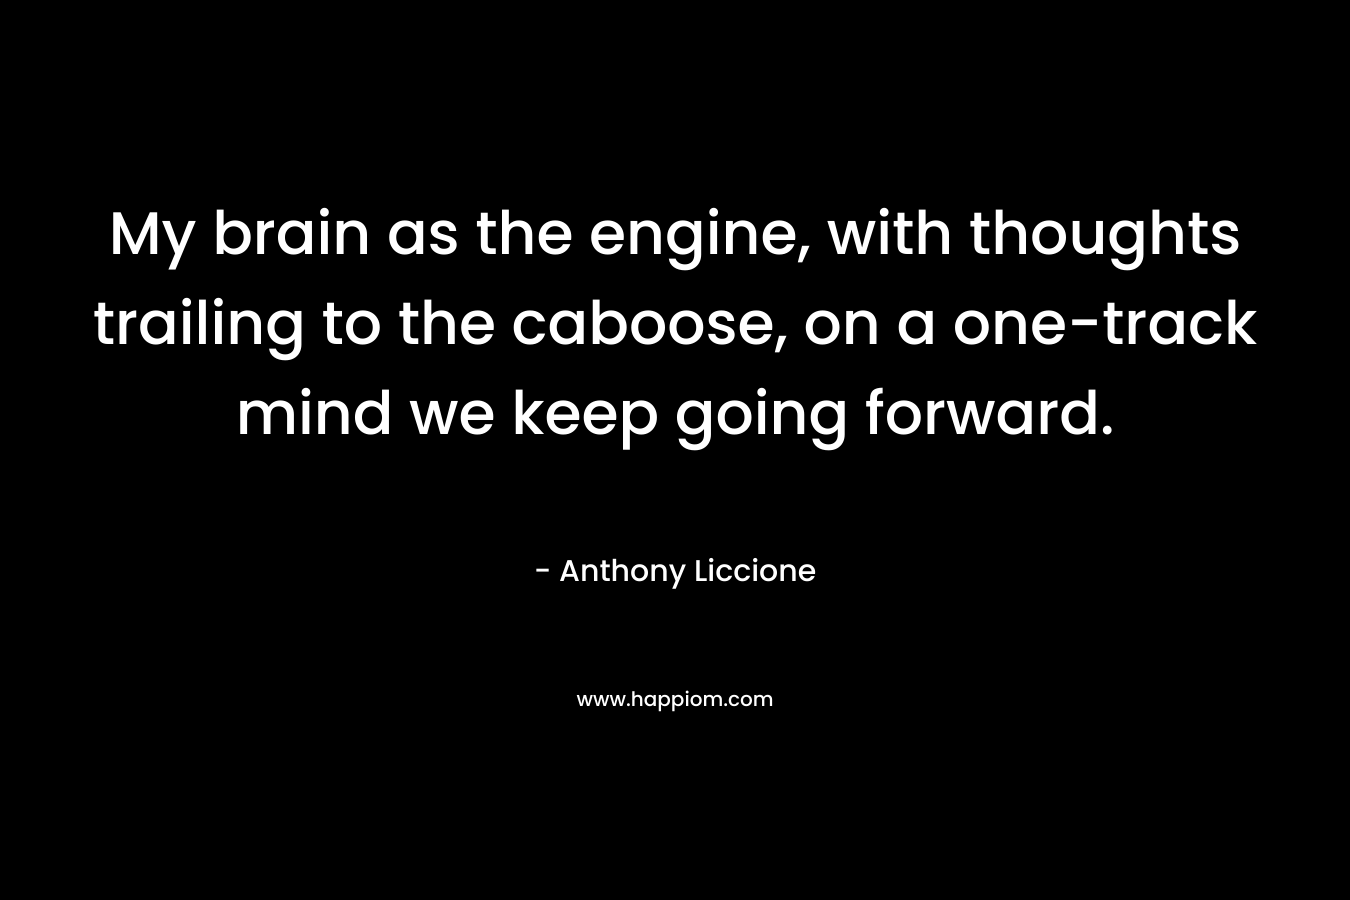 My brain as the engine, with thoughts trailing to the caboose, on a one-track mind we keep going forward.